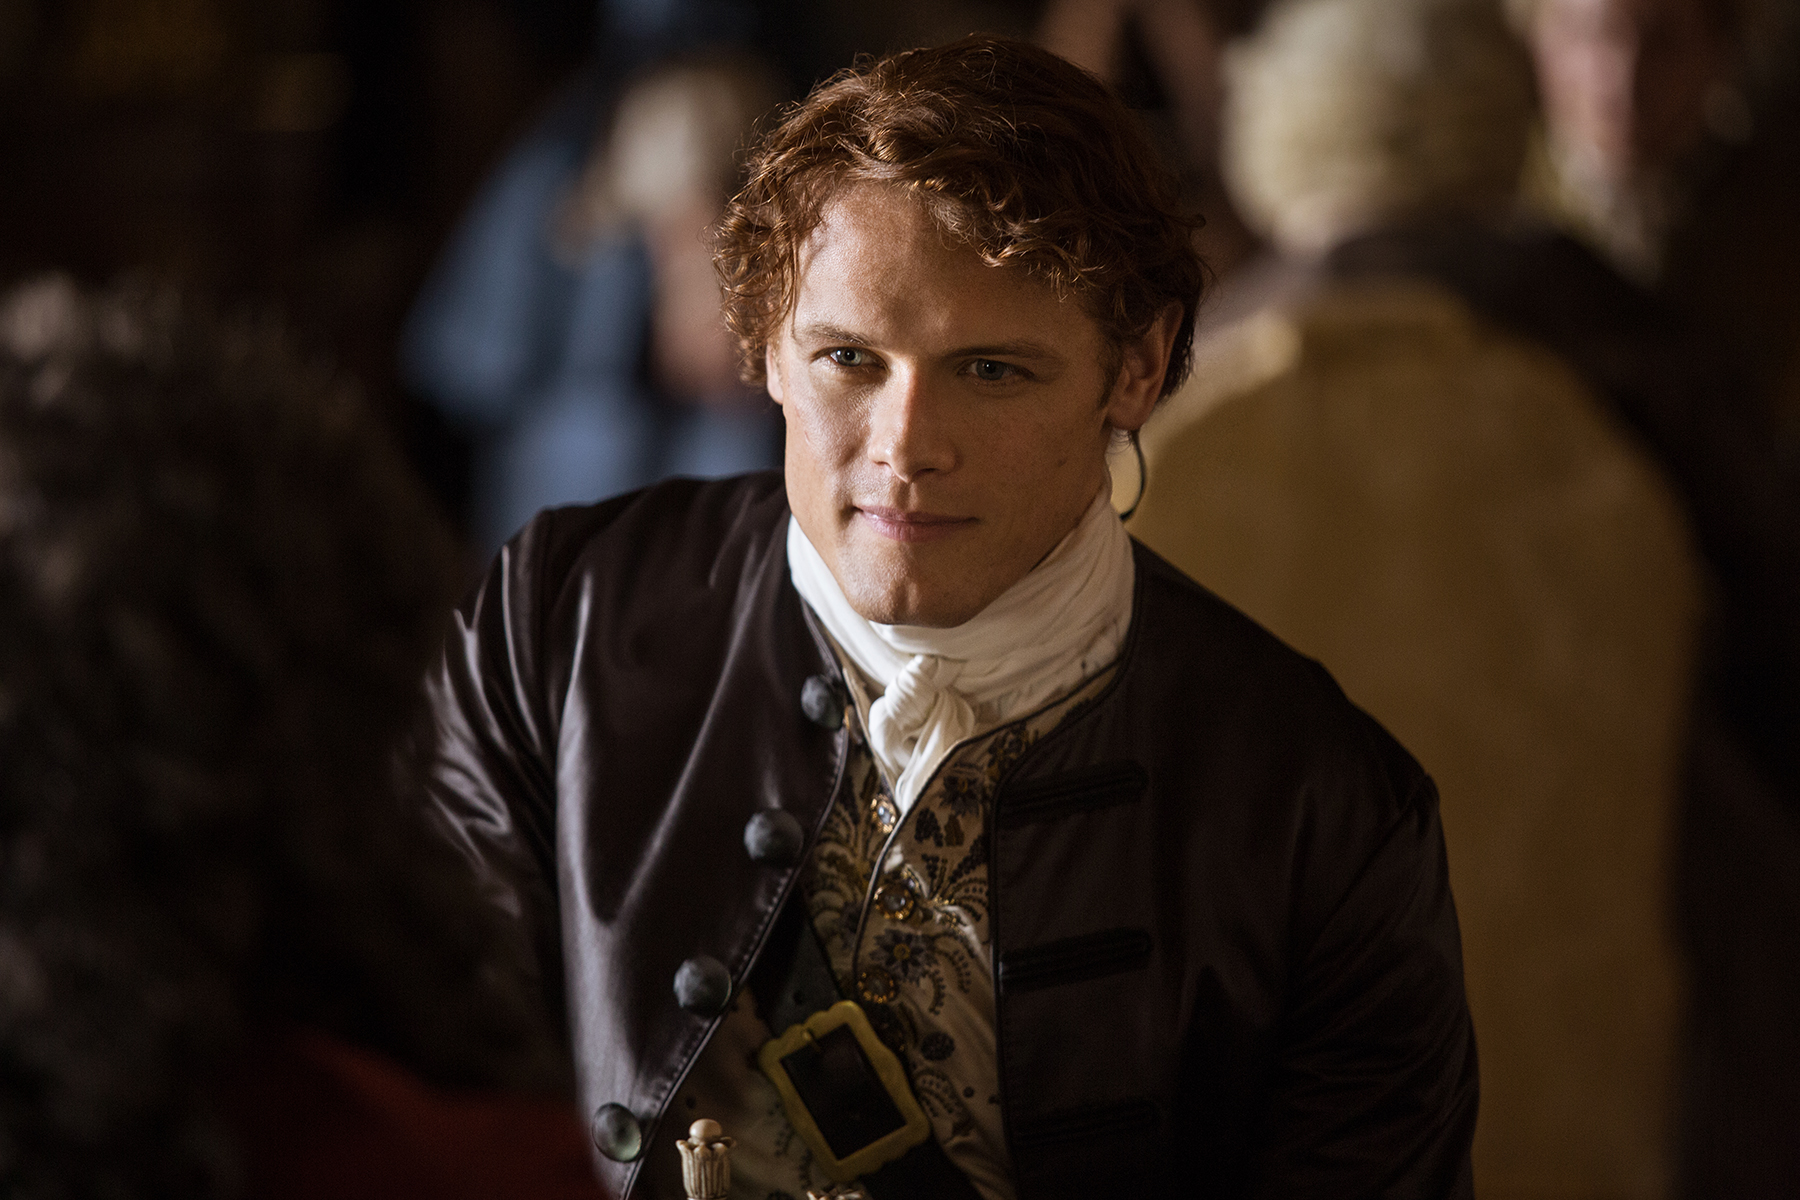 Jamie (Sam Heughan). Not pictured: the chessboard he is currently dominating the crap out of.